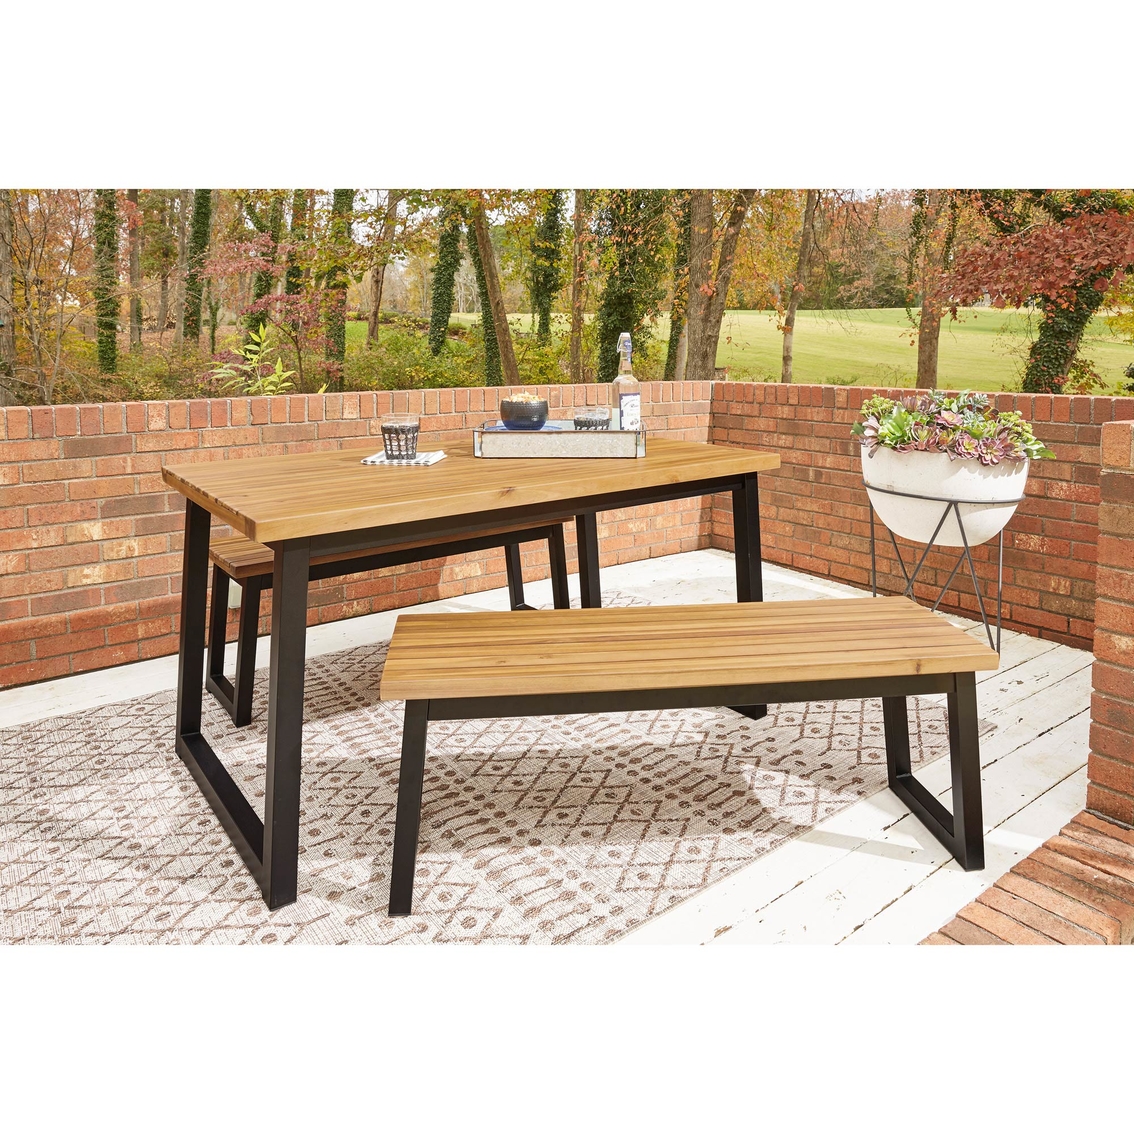 Signature Design by Ashley Town Wood Outdoor 3 pc. Dining Set with Bench - Image 7 of 8